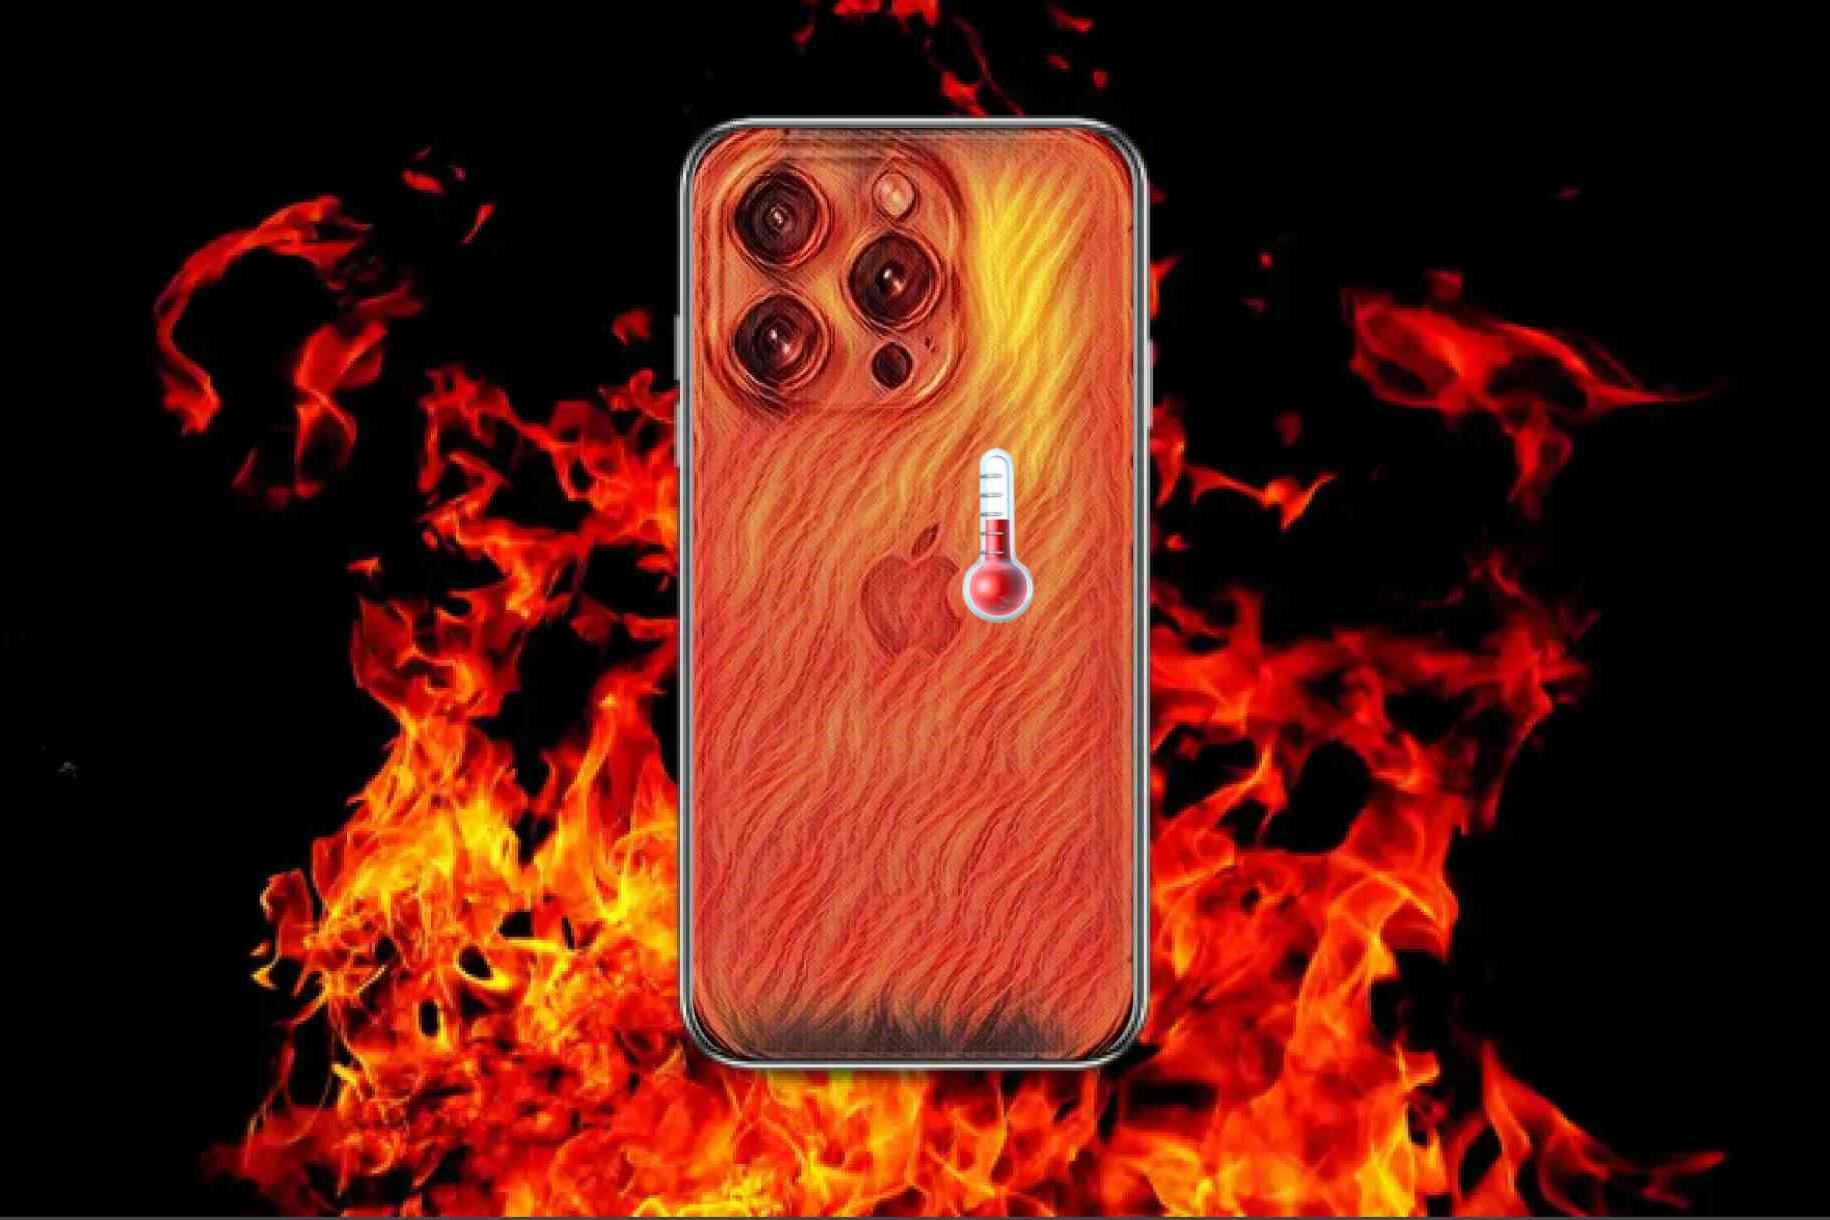 device-temperature-addressing-overheating-issues-on-iphone-13